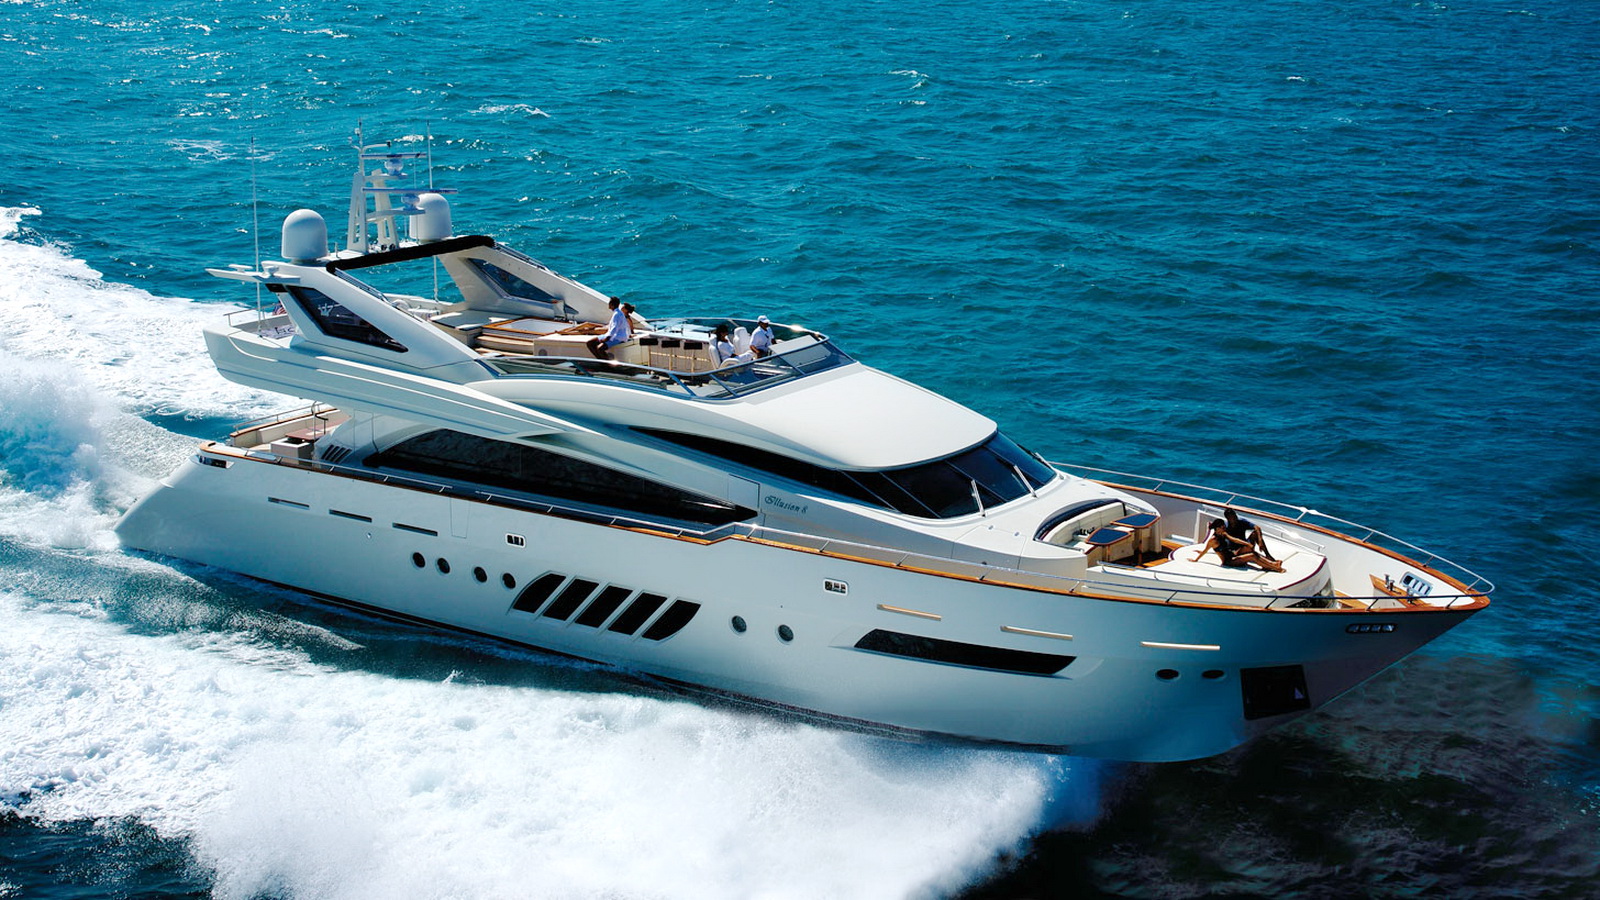 dominator yachts for sale